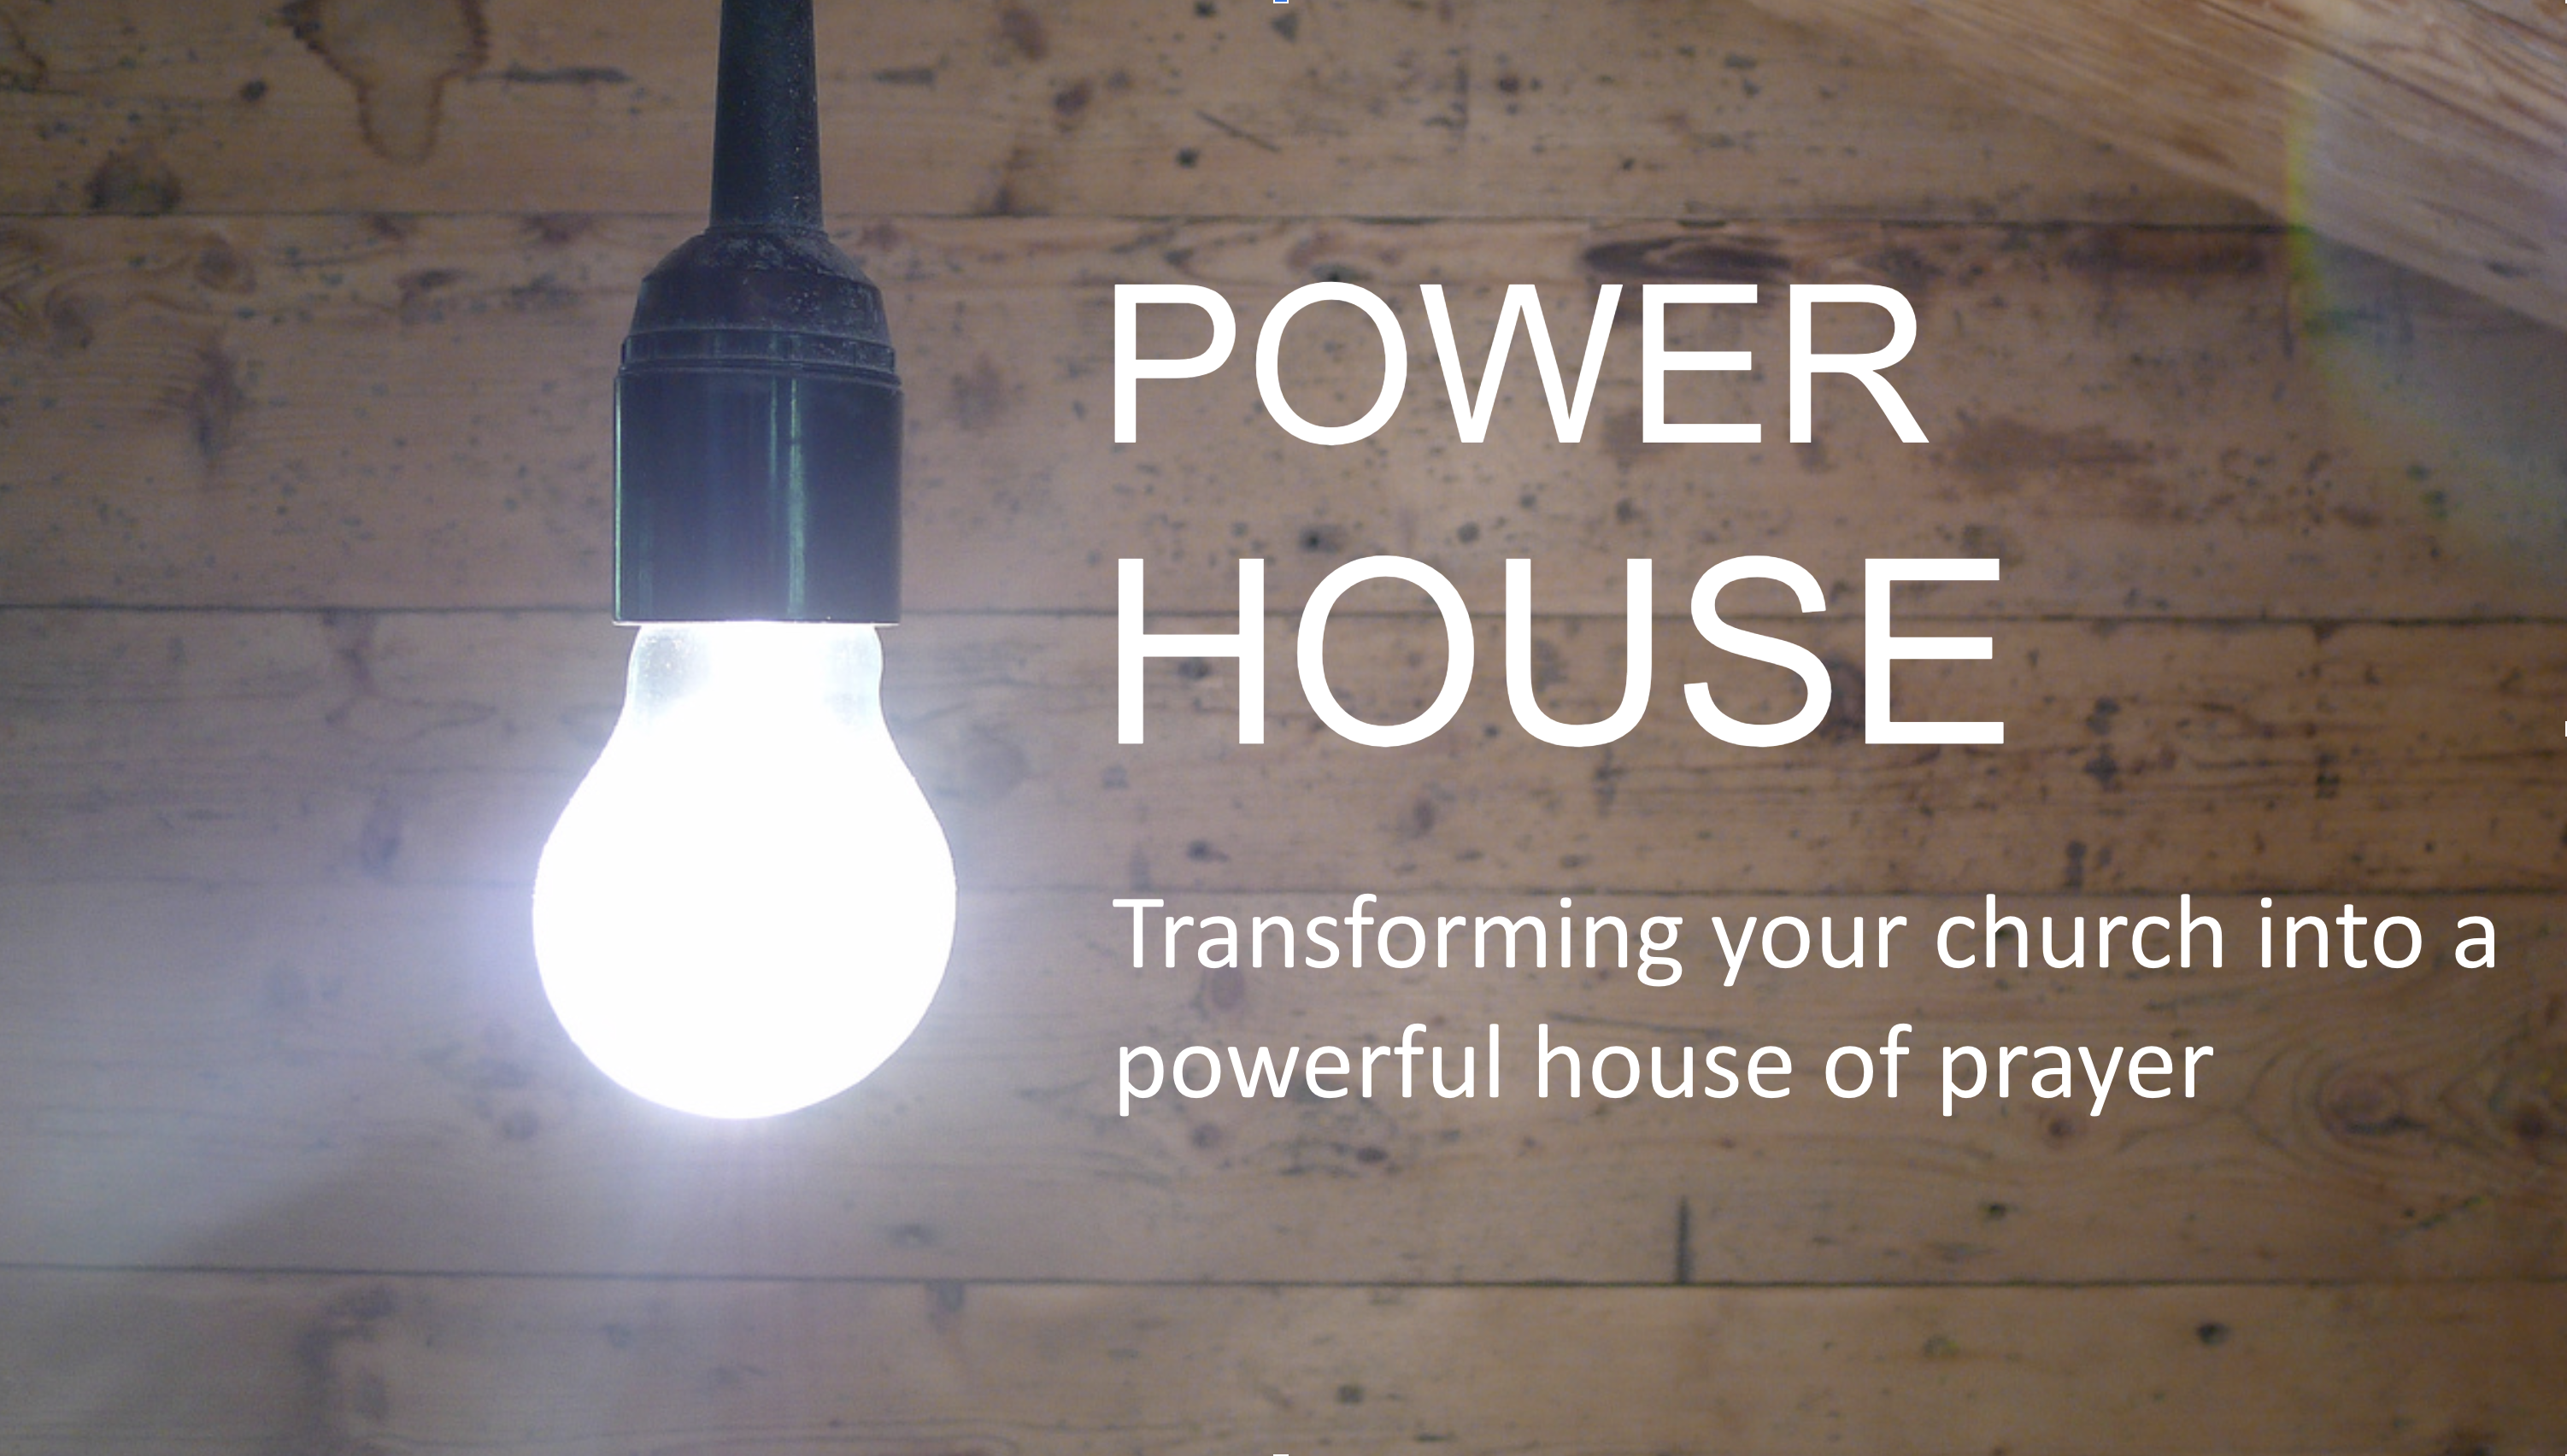 Featured image for “Power House by Randy Maxwell”